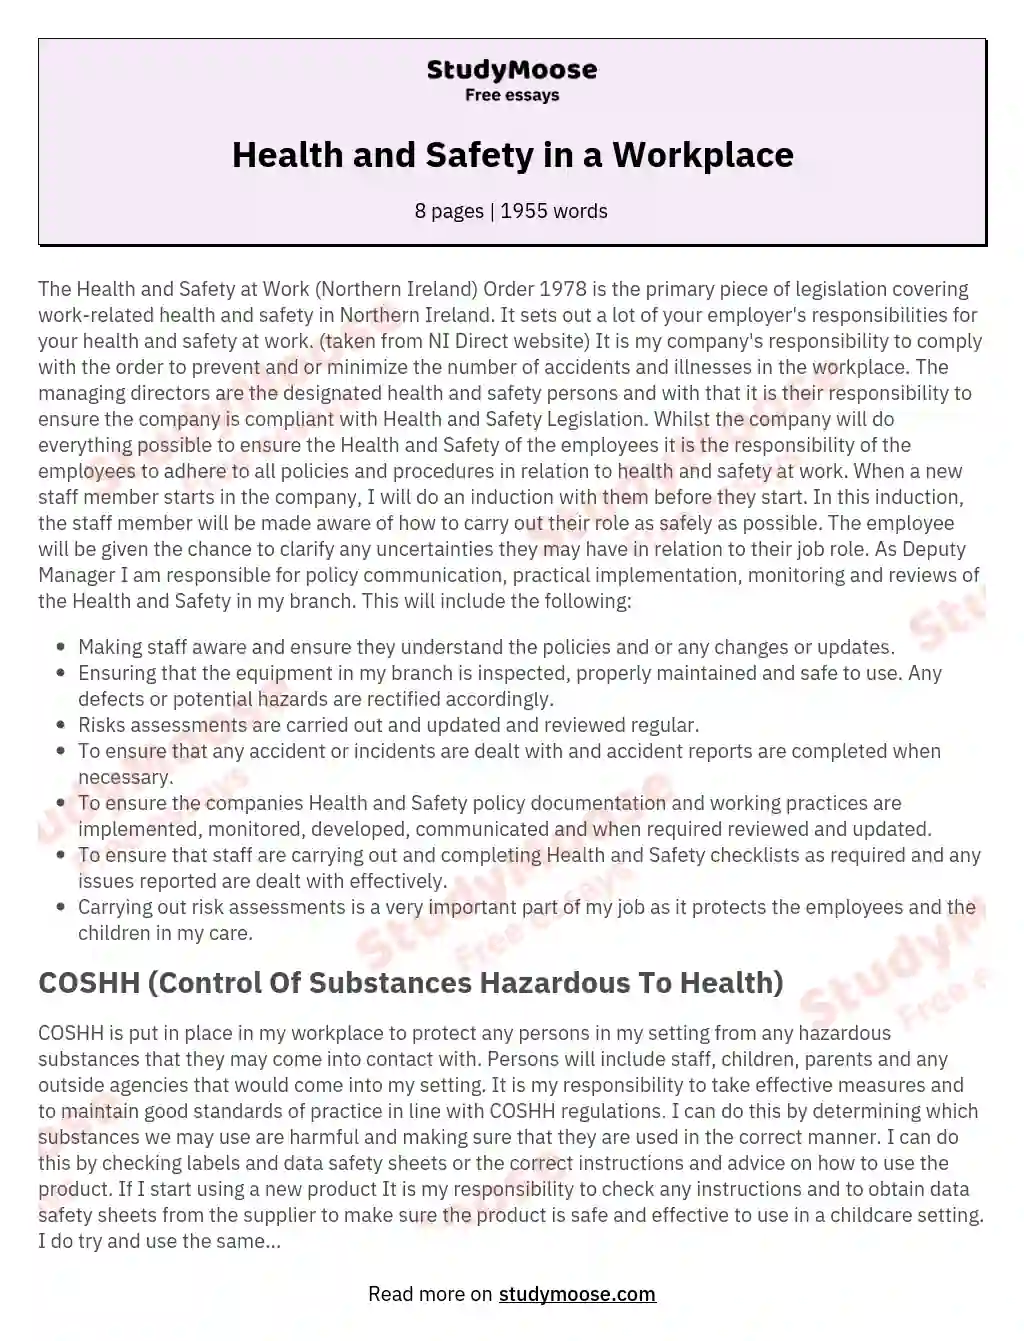 Health and Safety in a Workplace essay